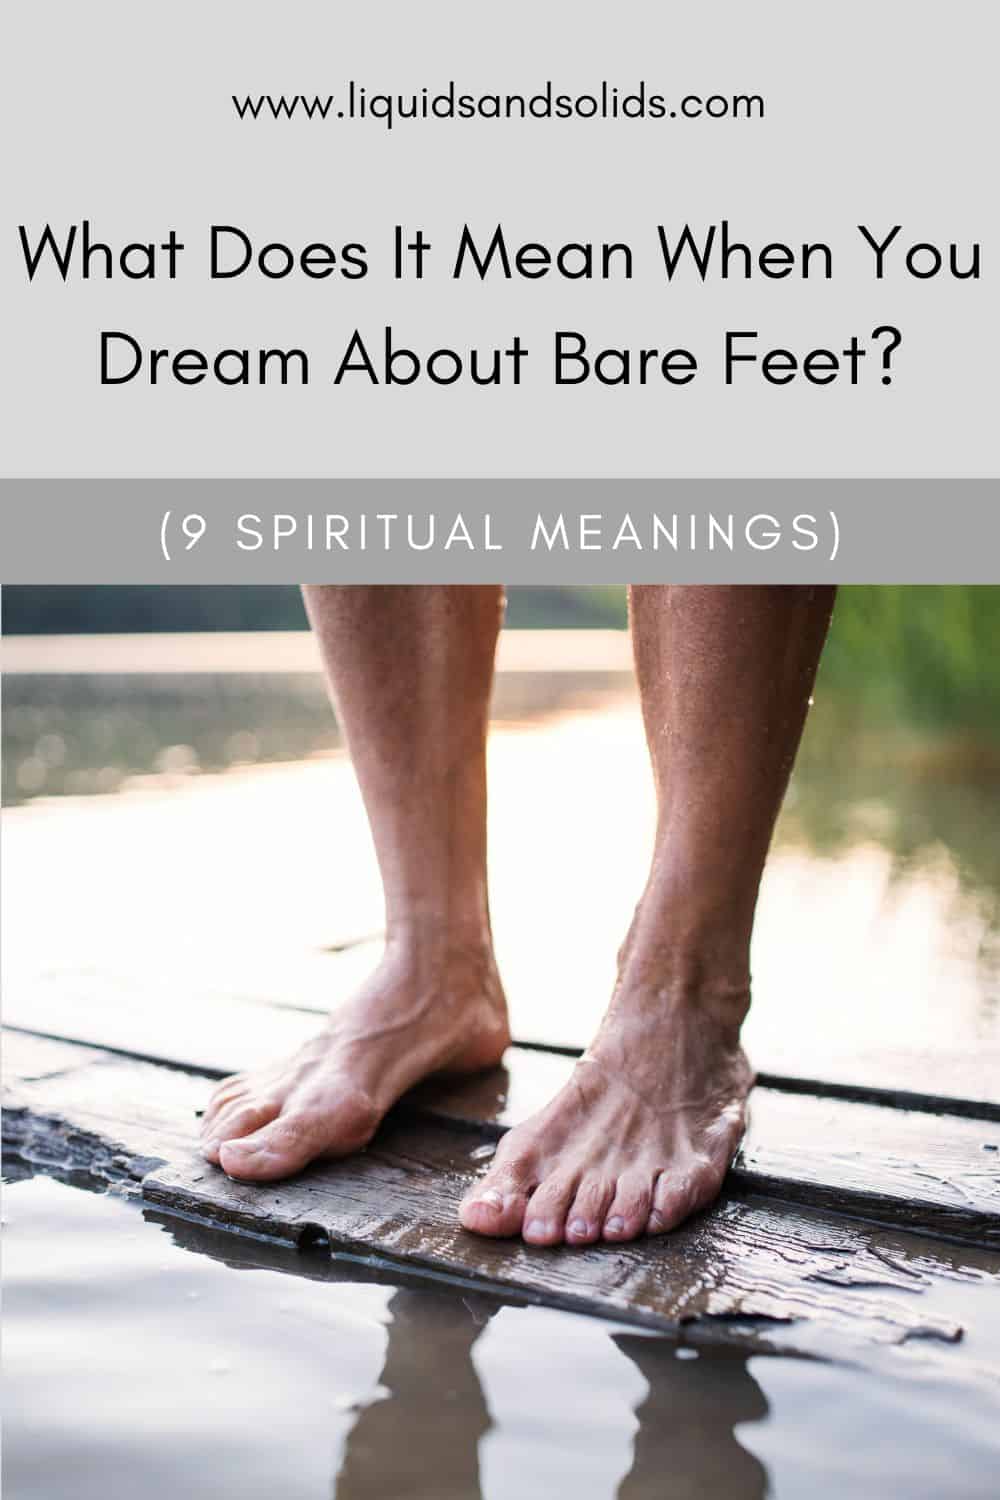 What Does It Mean When You Dream About Bare Feet? (9 Spiritual Meanings)